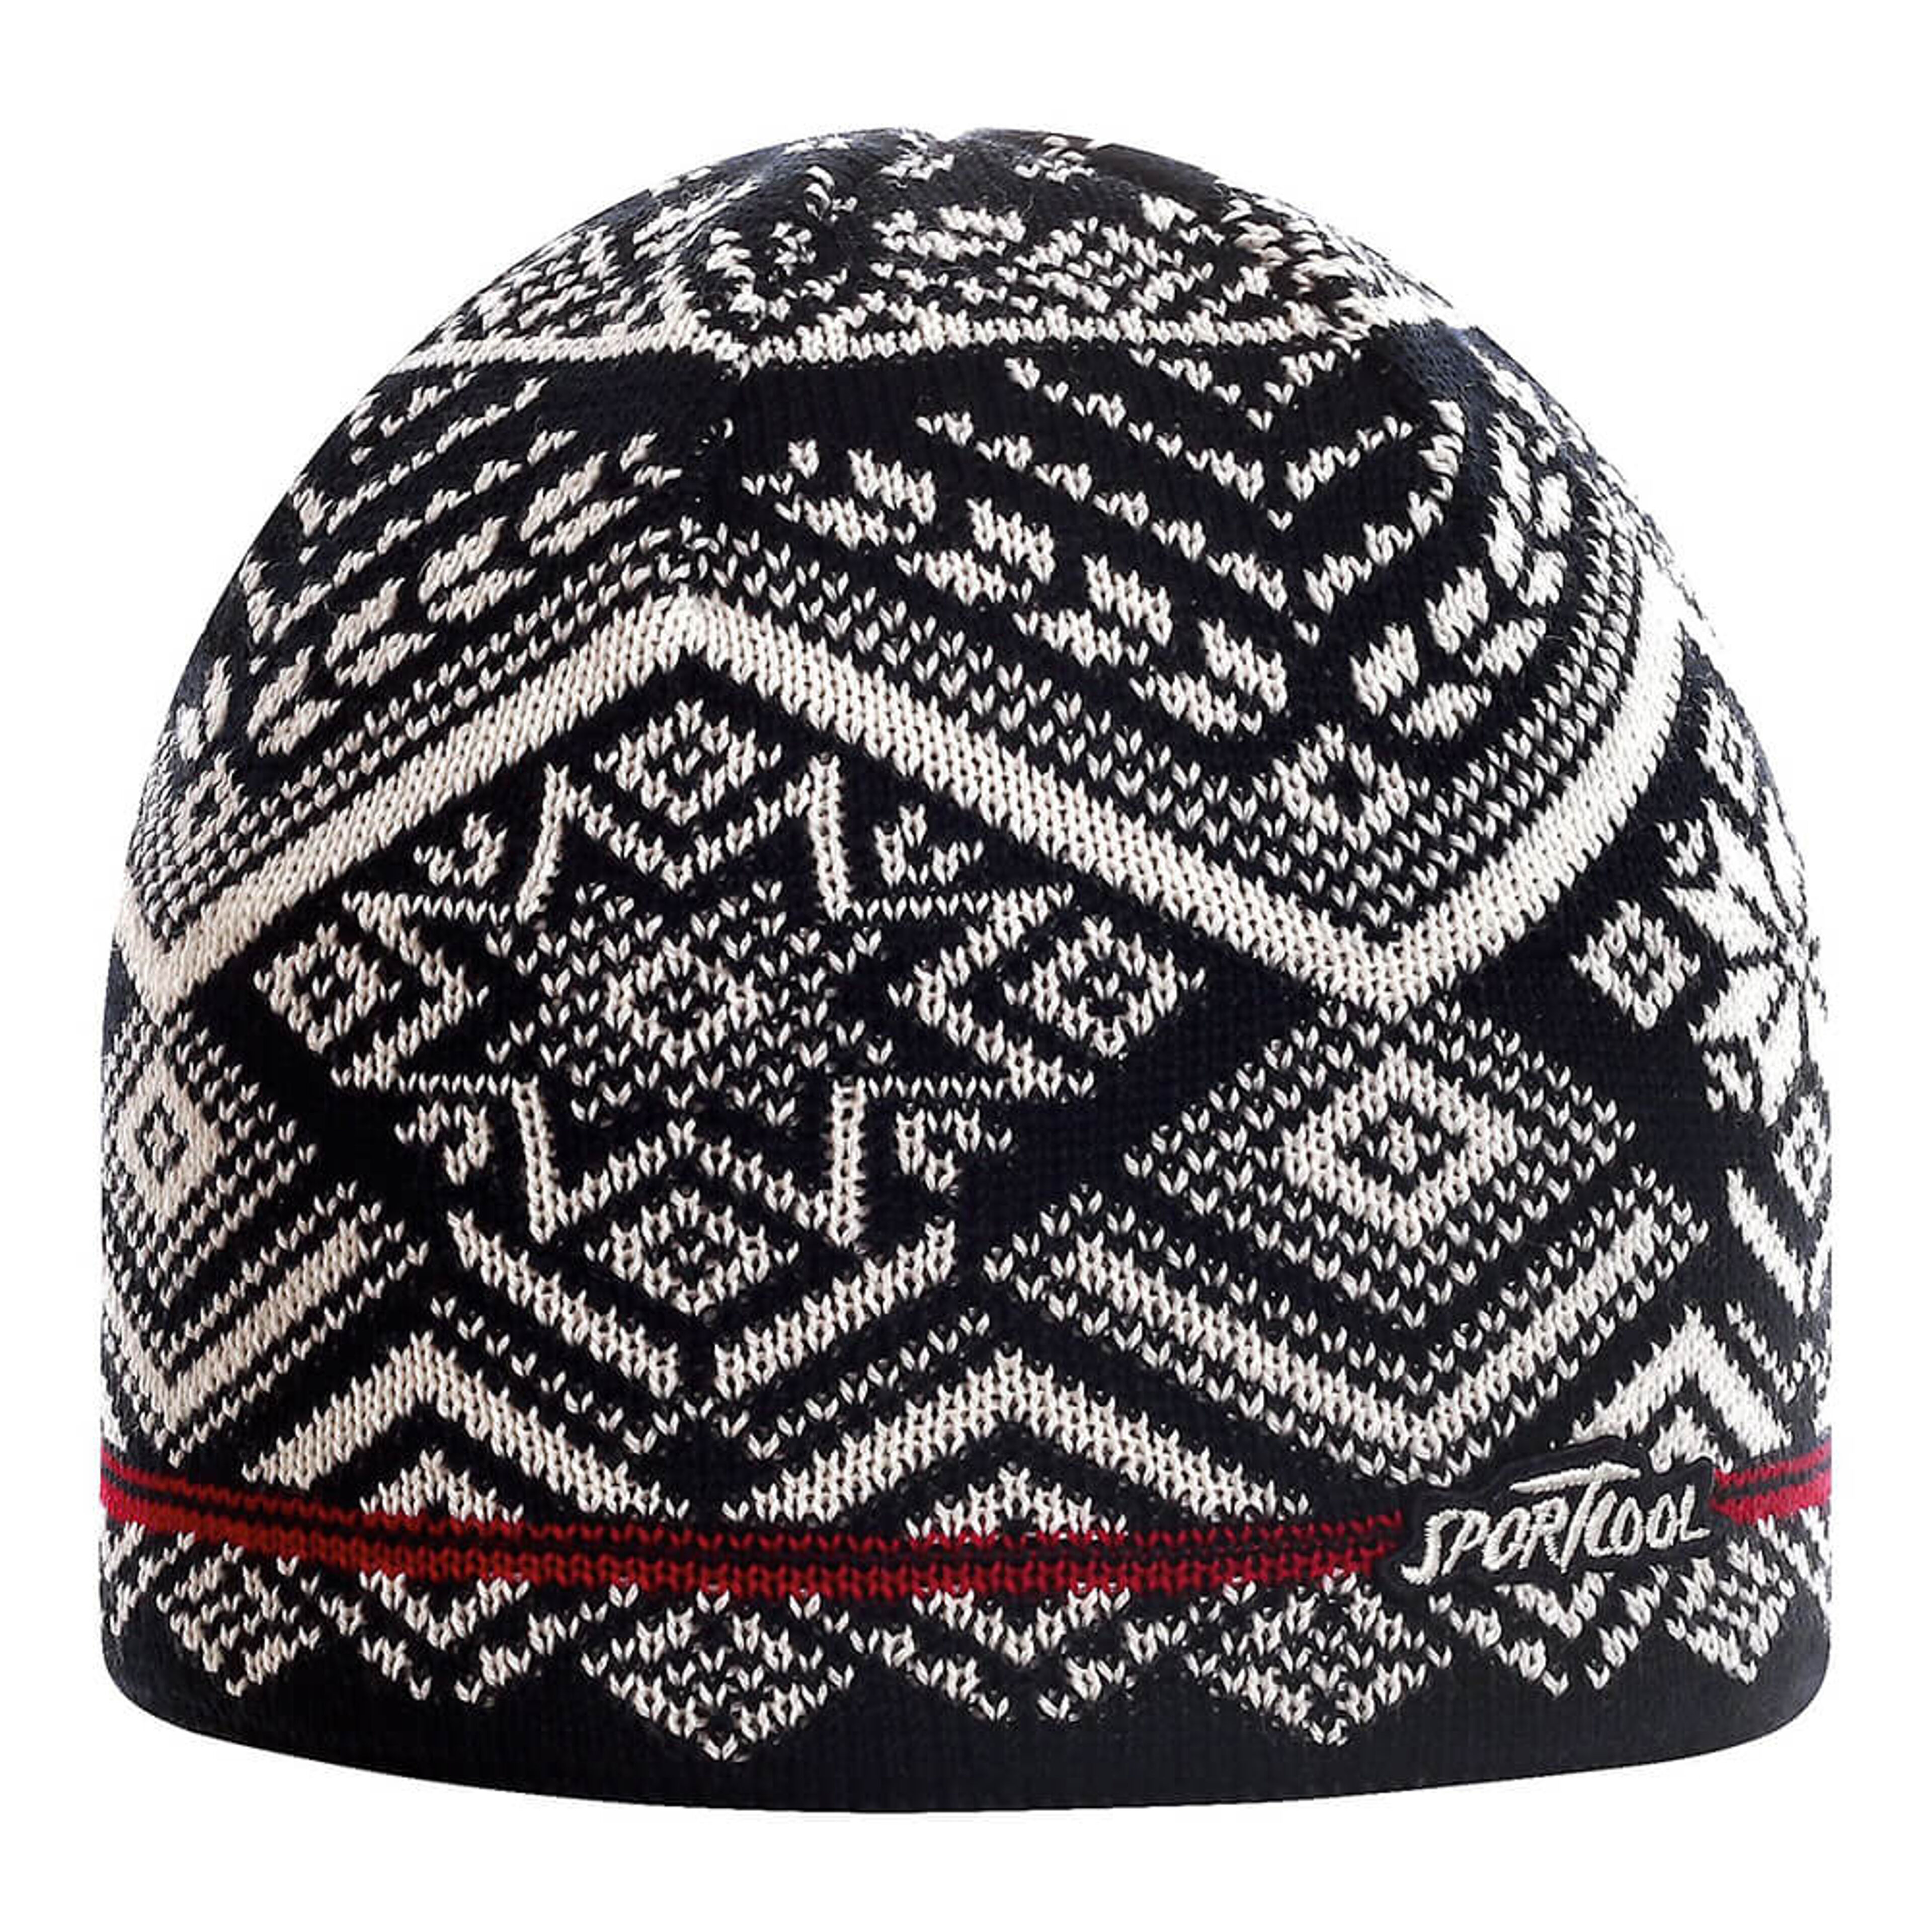 SportCool Men’s Beanie with Classic Norwegian pattern (257)